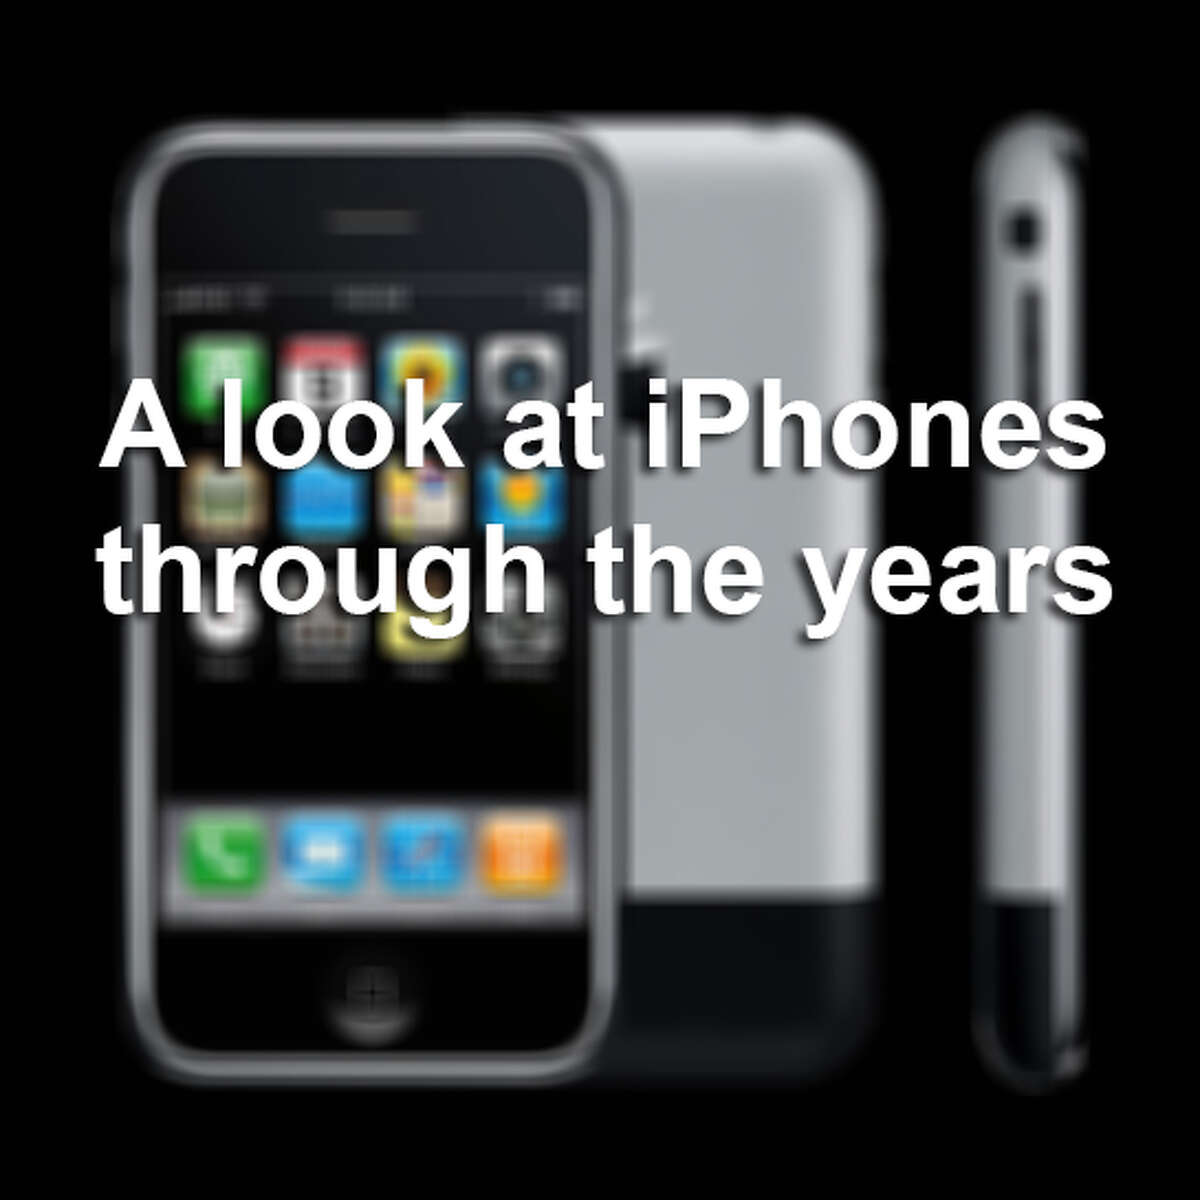 See how the newest iPhone models compare to the original and how the popular device has transformed through the years.